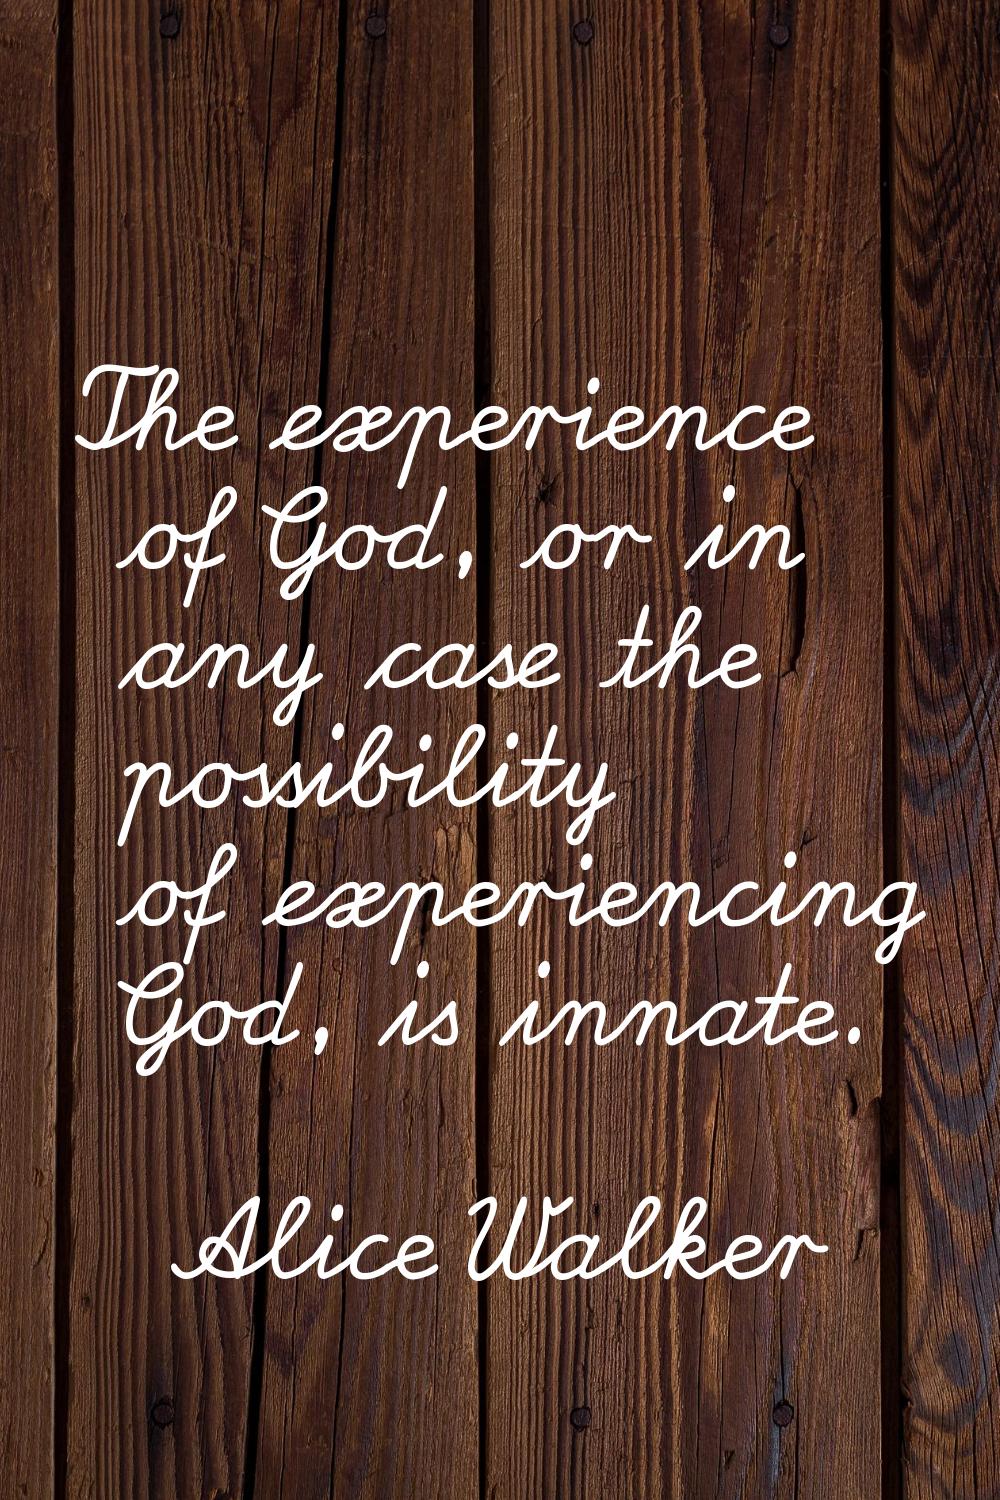 The experience of God, or in any case the possibility of experiencing God, is innate.